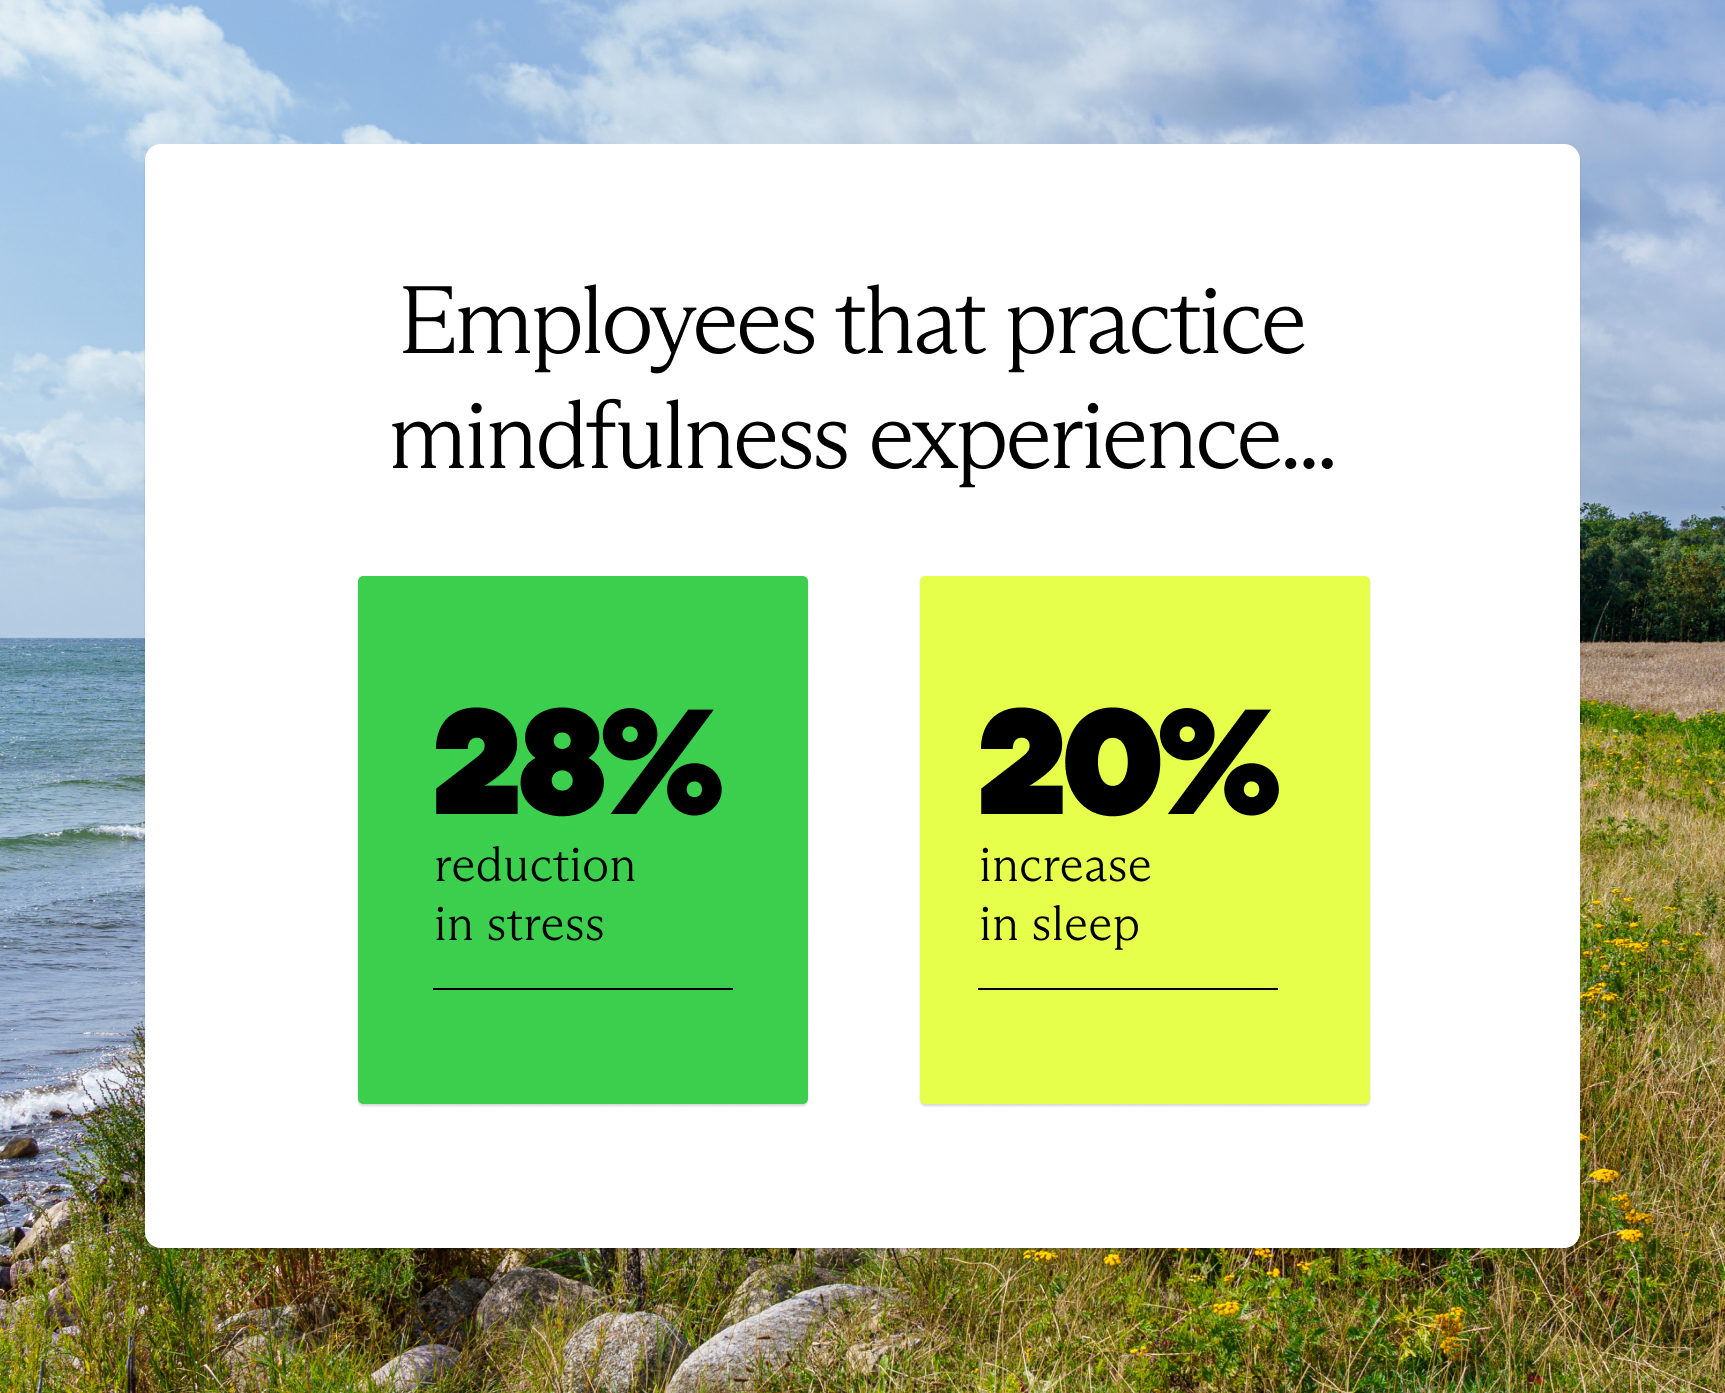 Employees that practice mindfulness experience 28% reduction in stress and 20% increase in sleep